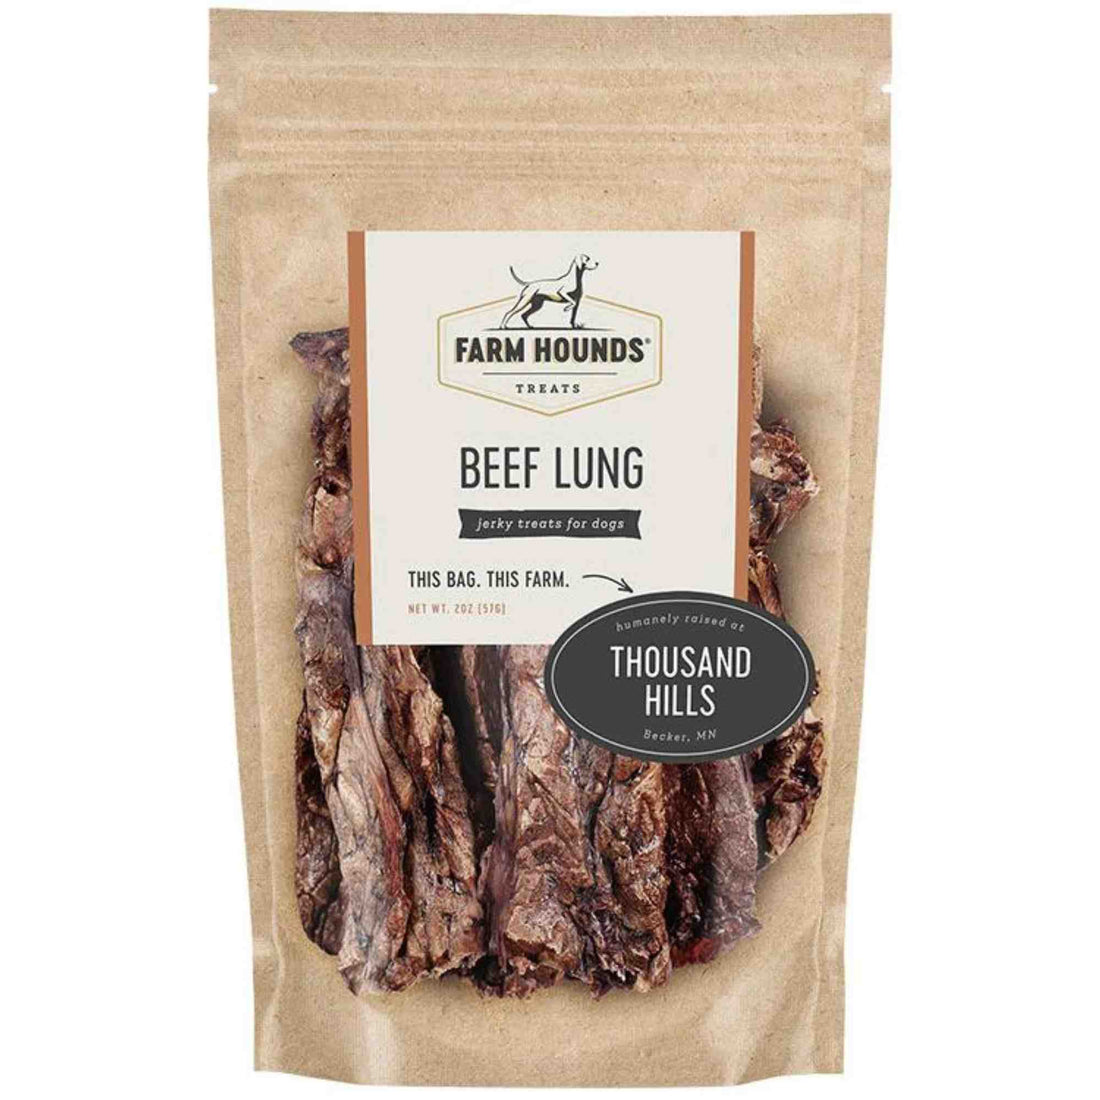 Beef Lung 2oz front Dehydrated Dog treat chew thousand hills Farm Hounds